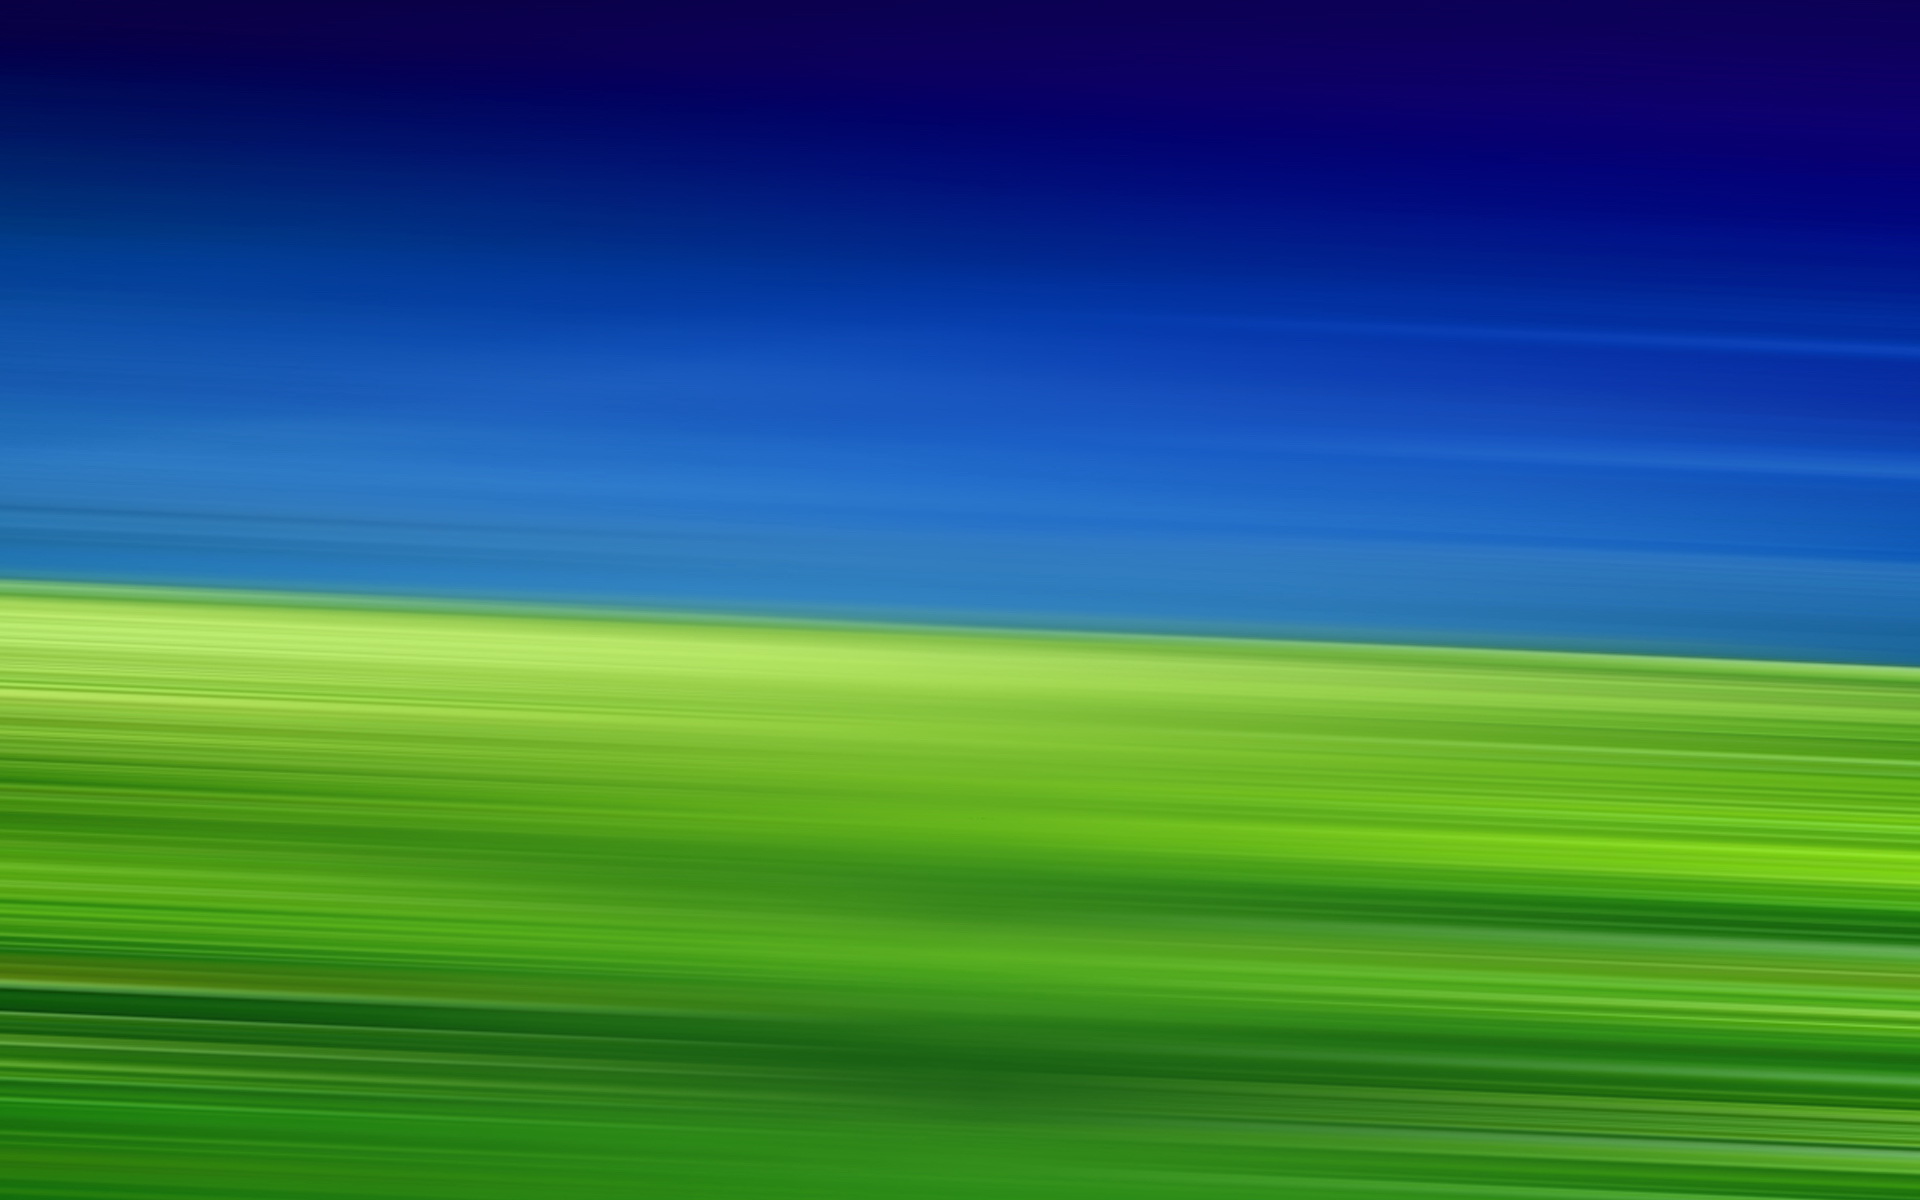 Blue And Green wallpaper   347794